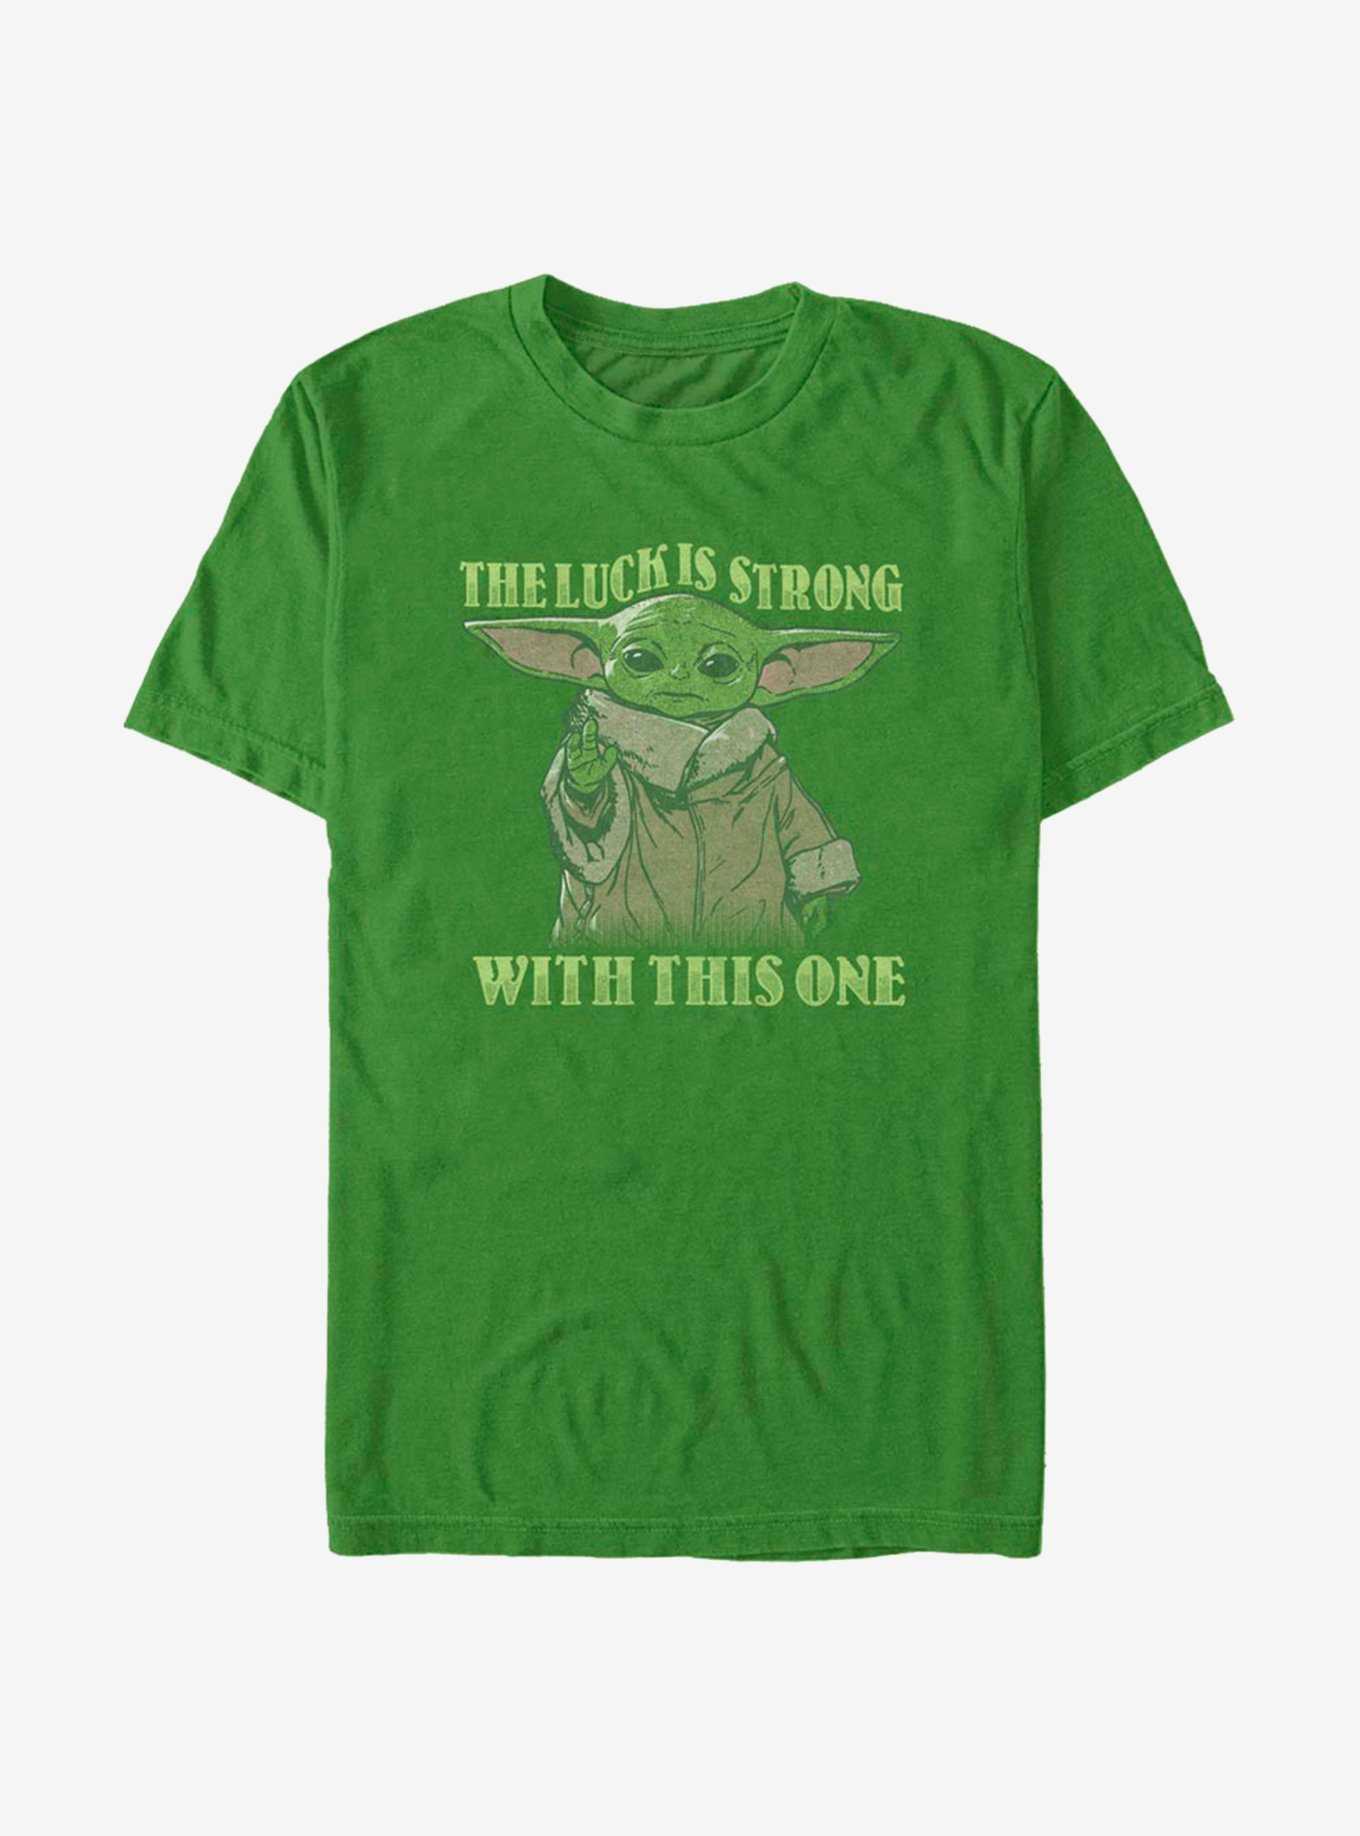 Star Wars The Mandalorian The Child Strong In The Luck T-Shirt, , hi-res